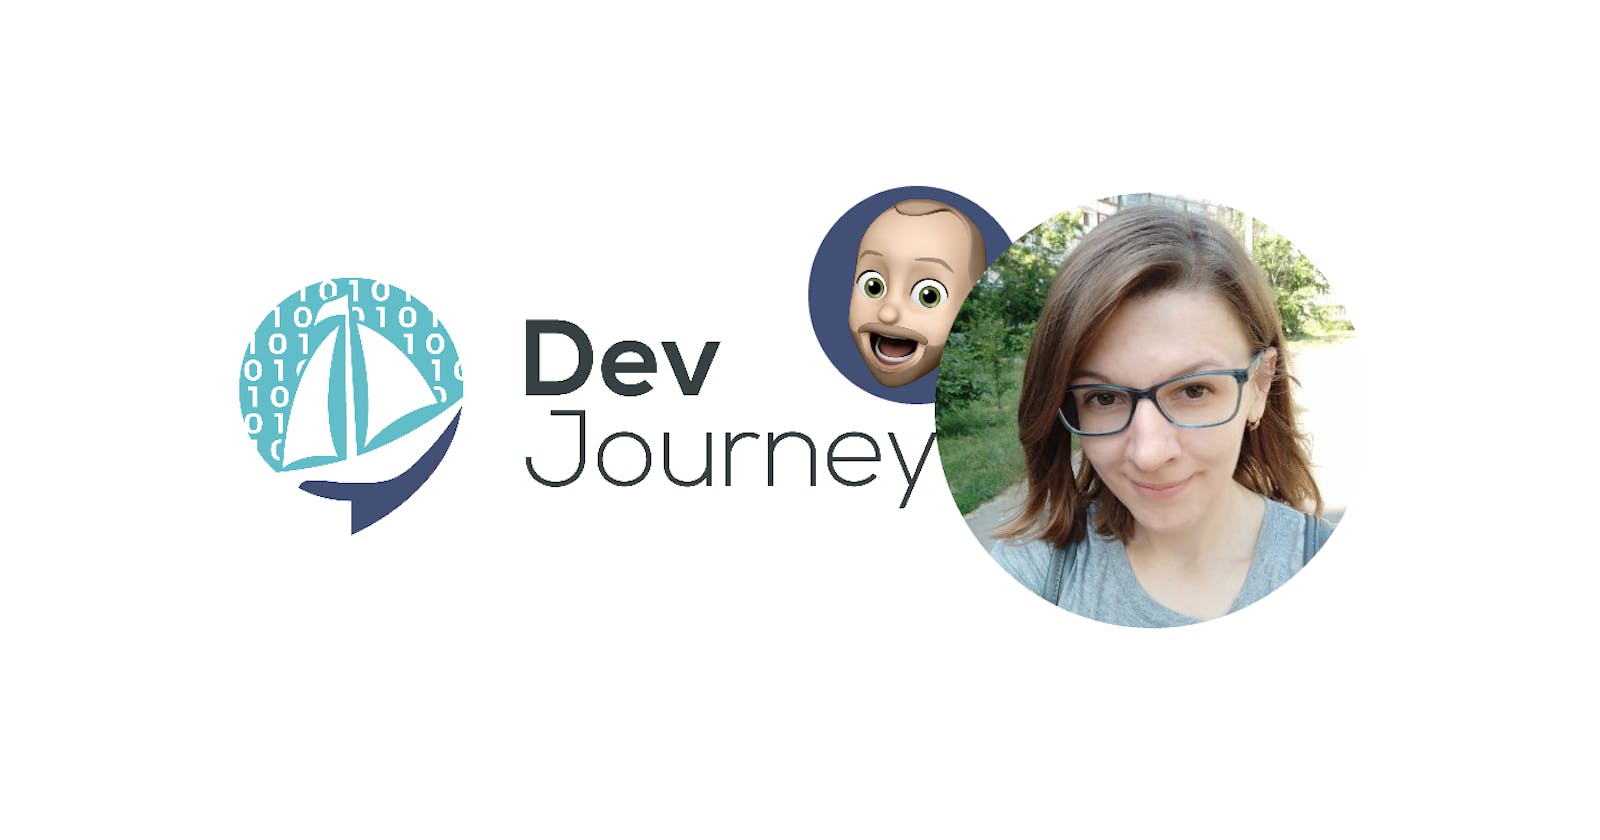 Natalia Tepluhina a DBA turned Vue.js-Expert at Gitlab... and other things I learned recording her DevJourney (#130)